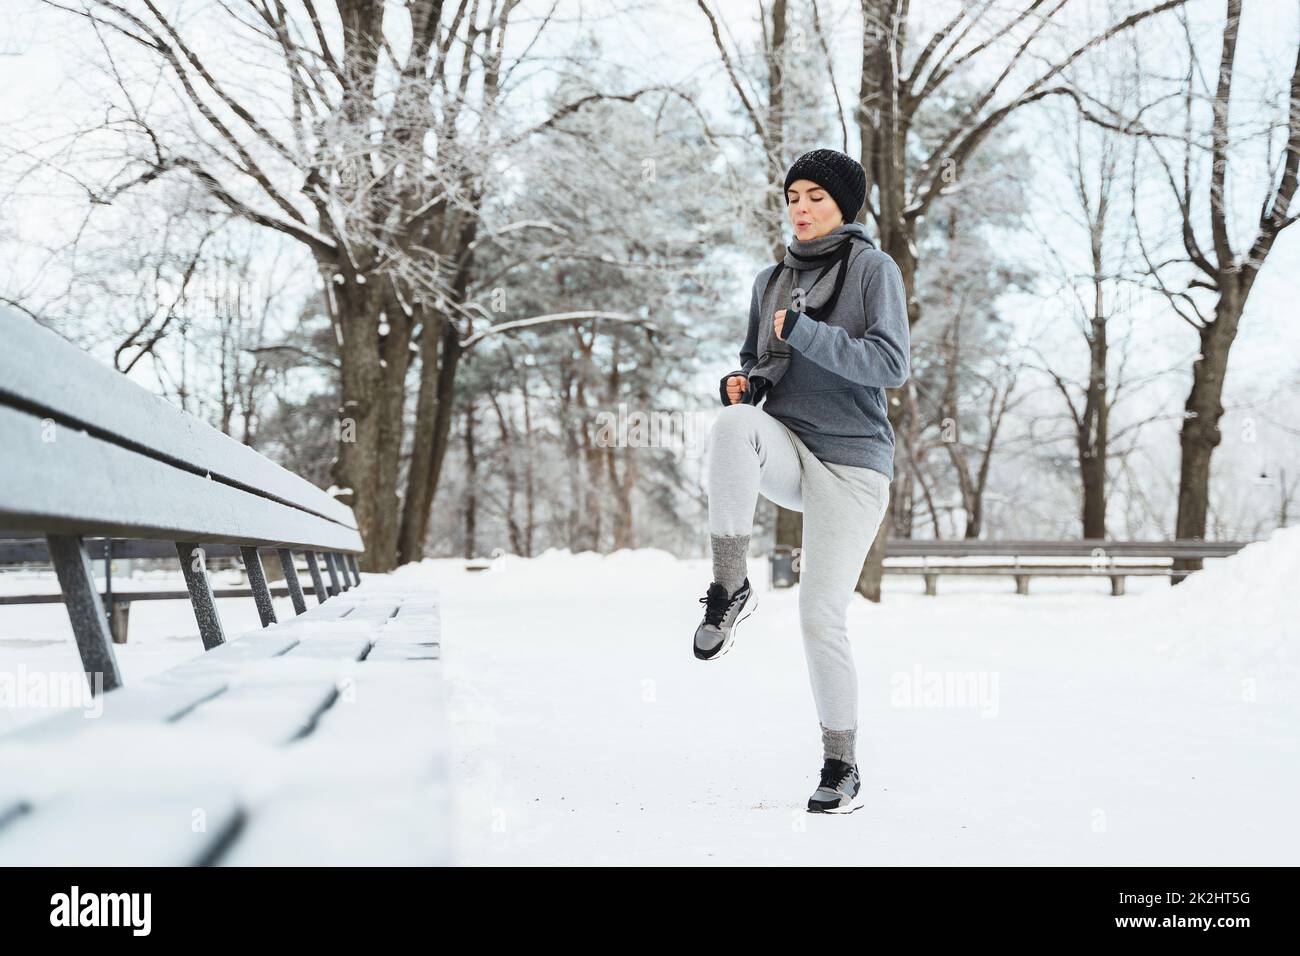 Woman warming up before her jogging workout during winter and snowy day Stock Photo